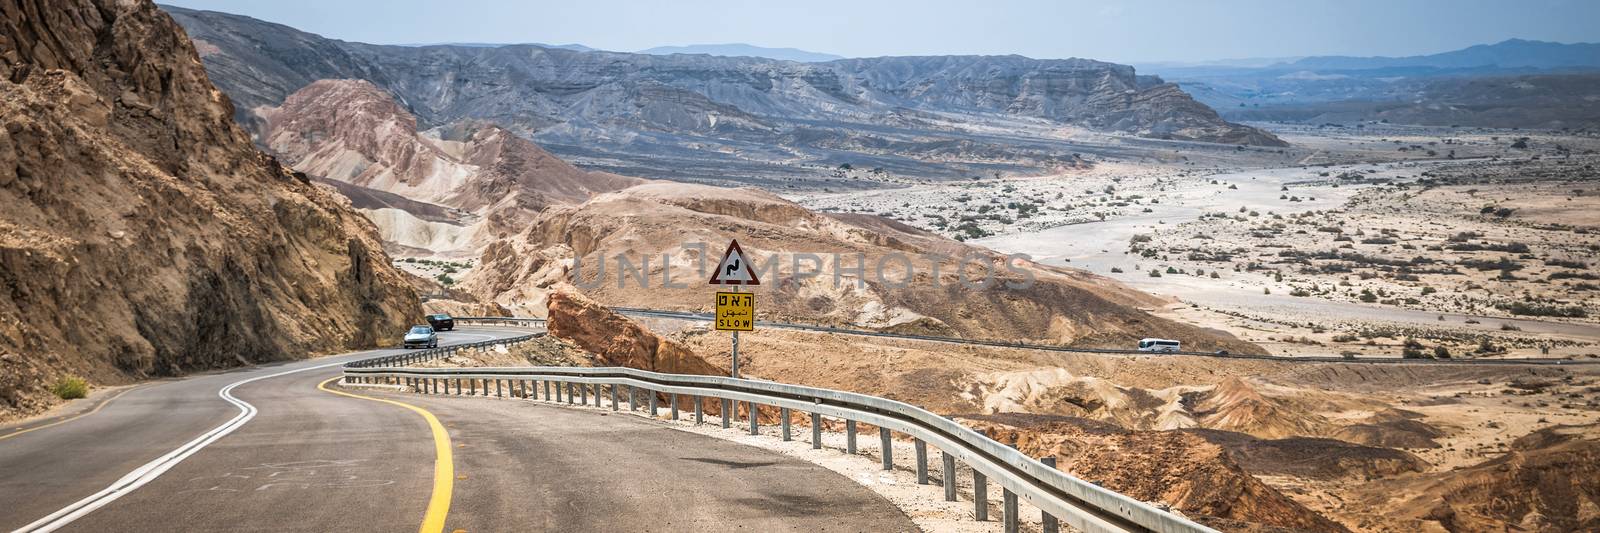 the negev desert in Israel by compuinfoto